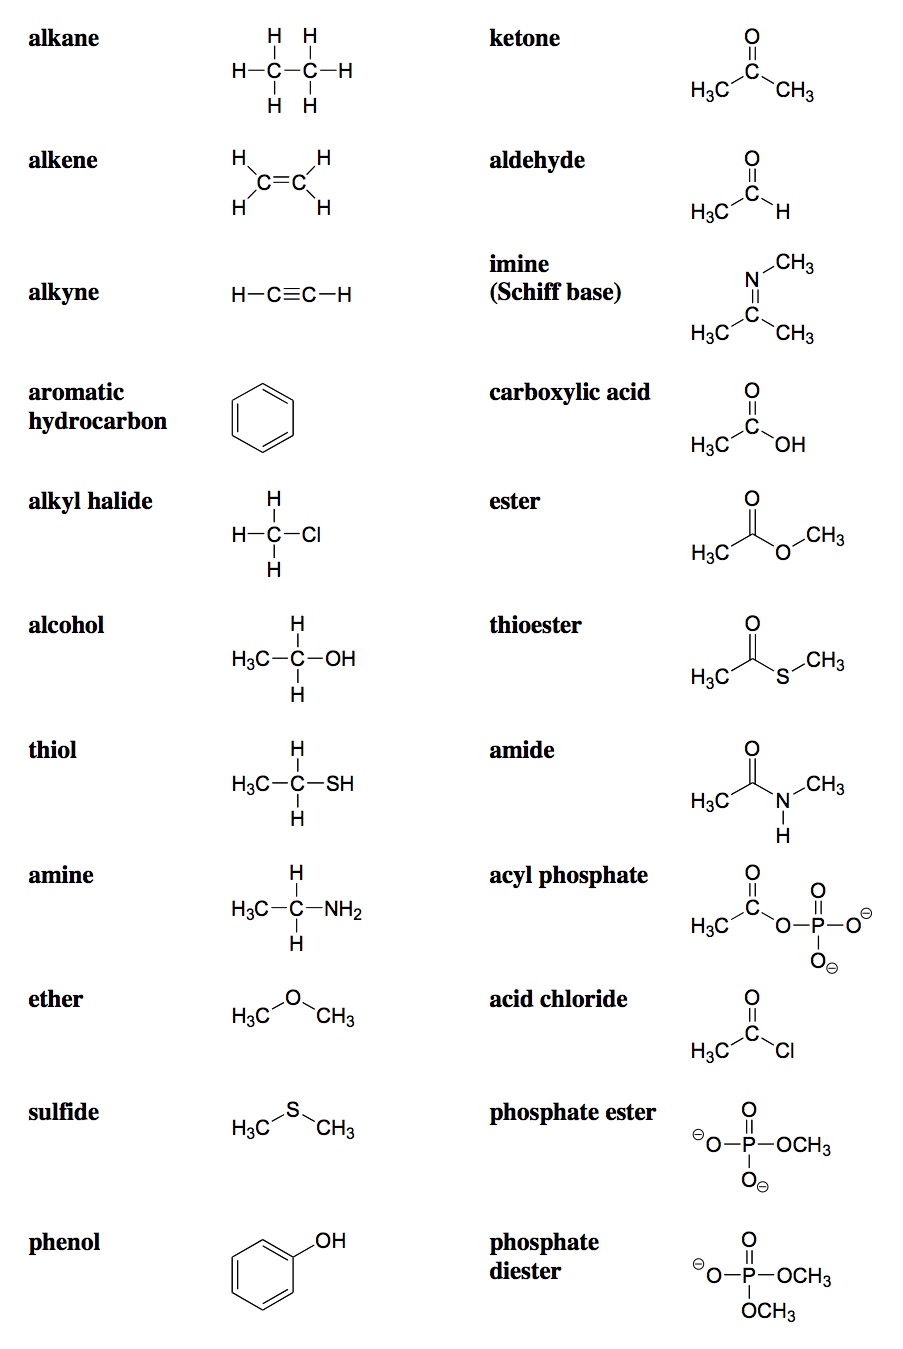 Functional Group Properties Chart